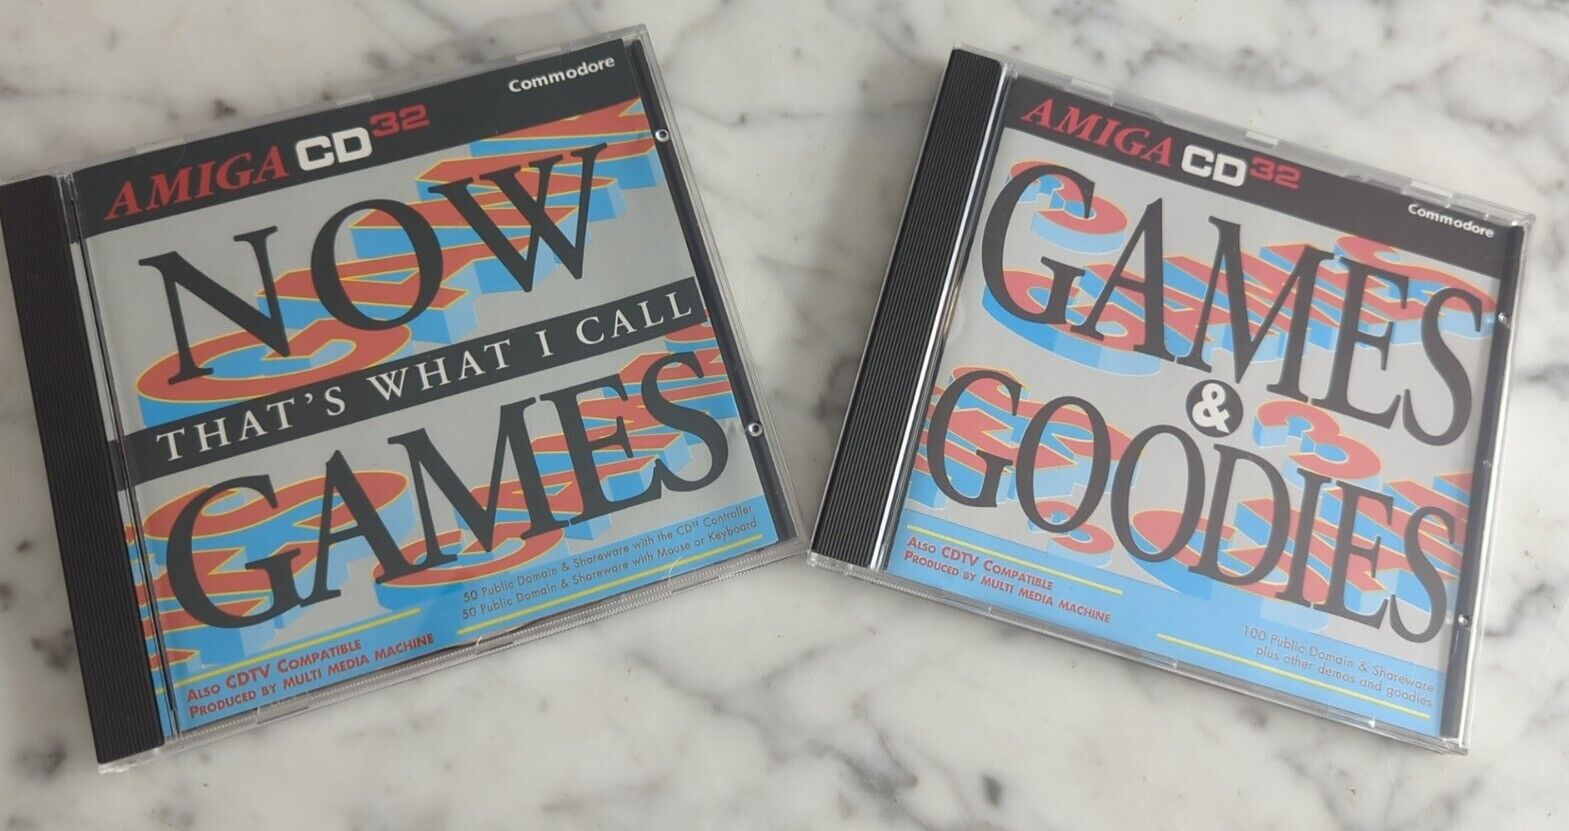 New 2x New Amiga CD32 / CDTV Game CD `Now Games Games & Goodies 806